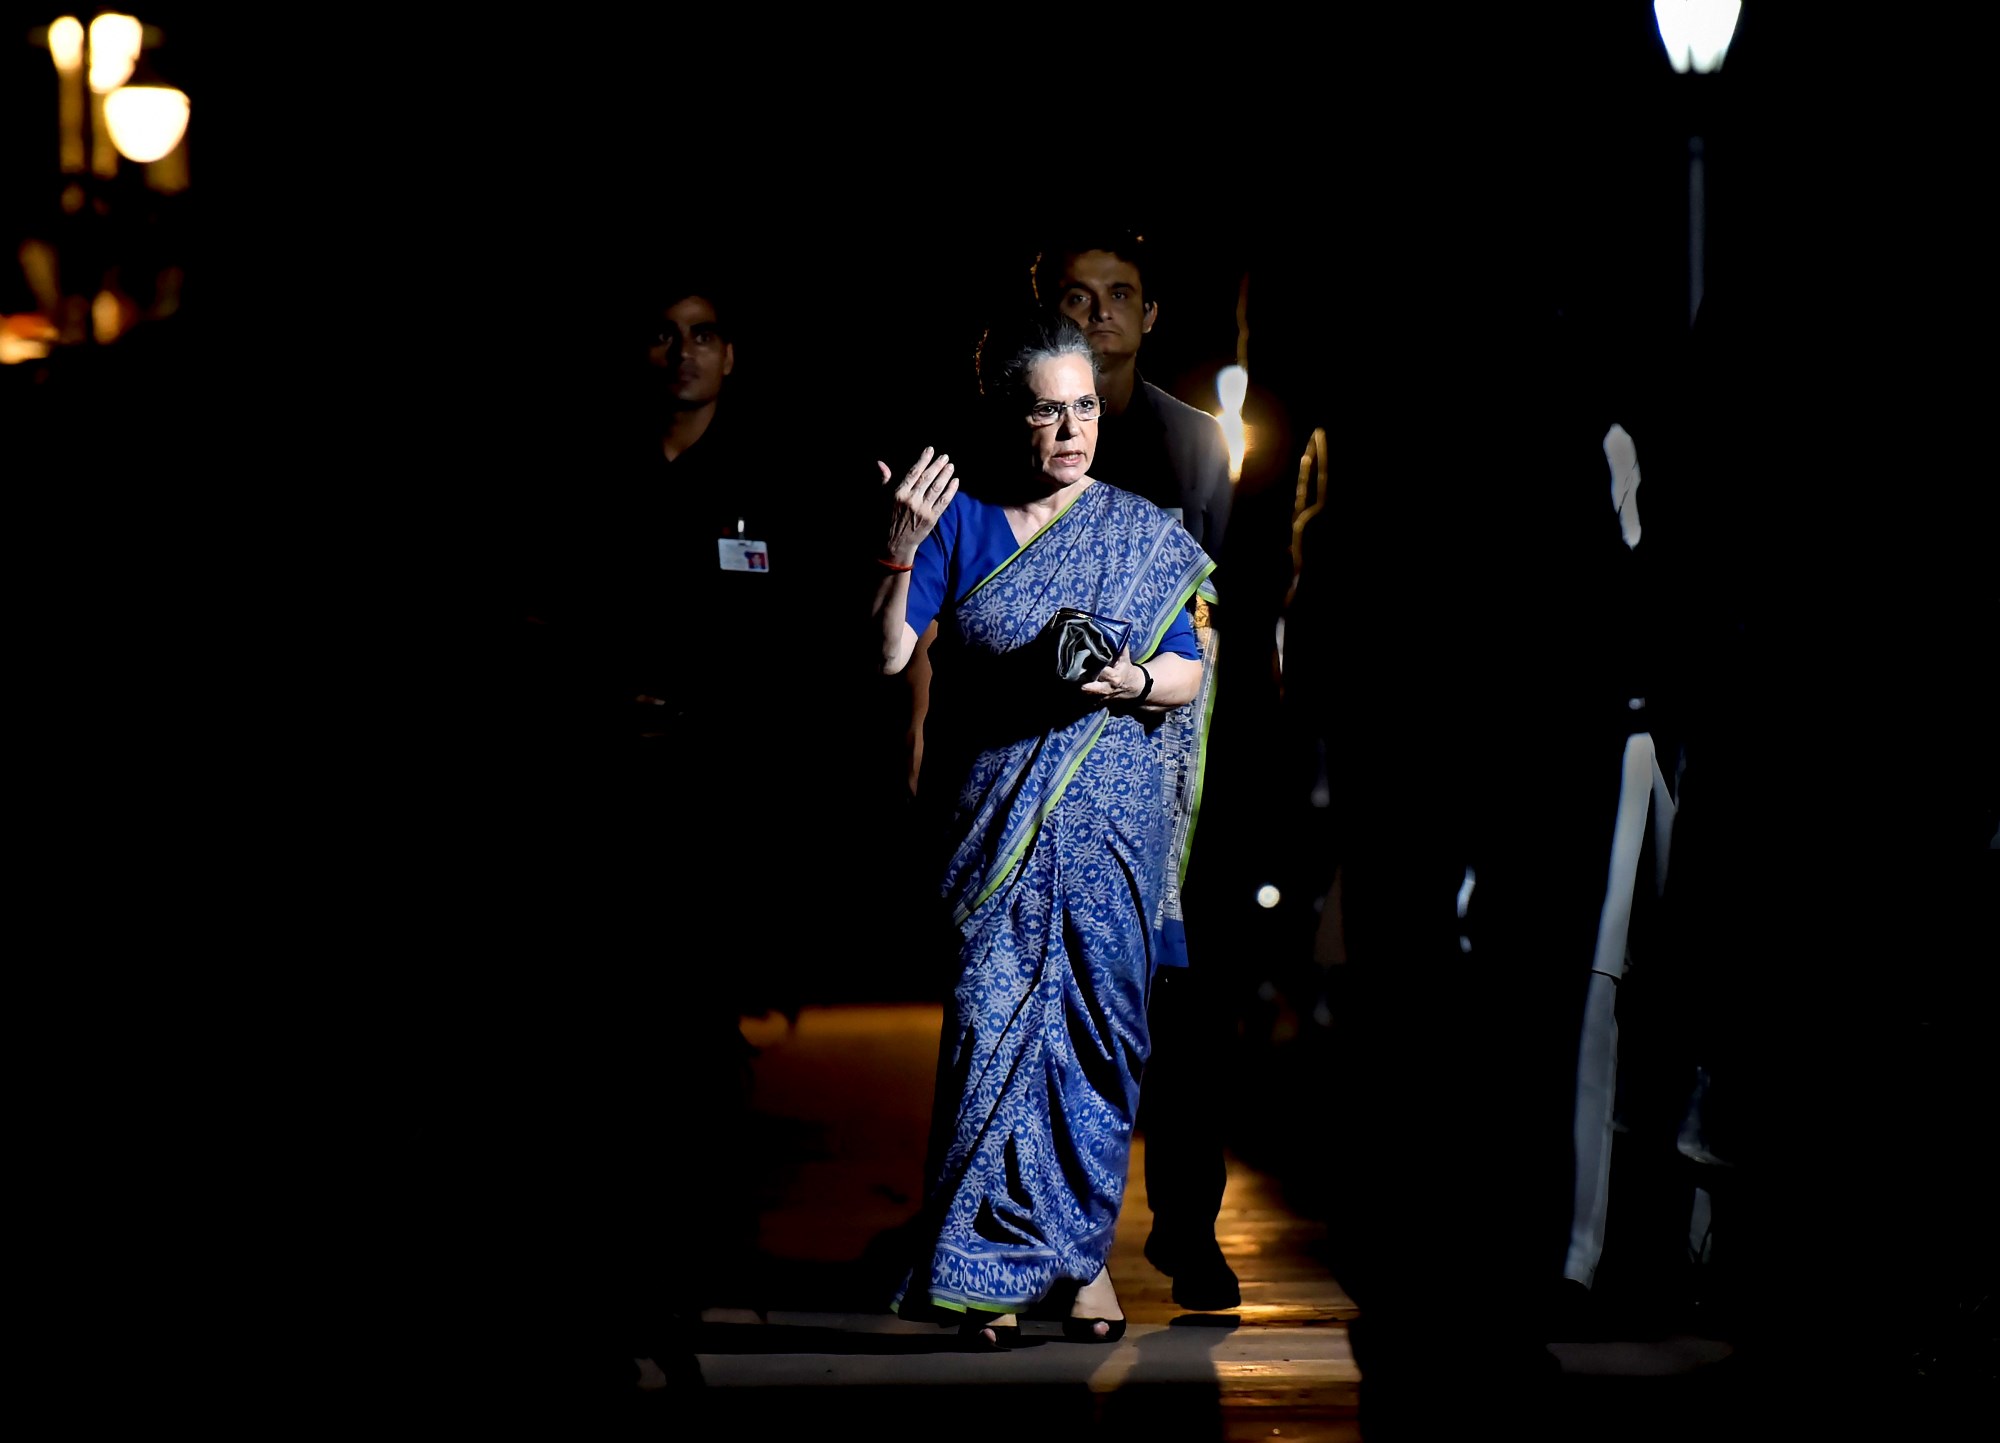 New Delhi: Congress Parliamentary Party (CPP) Chairperson Sonia Gandhi arrives to attend the Congress Working Committee (CWC) meeting, in New Delhi, Saturday, August 10, 2019. The Congress Working Committee late on Saturday named Congress Parliamentary Party chairperson Sonia Gandhi as party's interim President. (PTI Photo/Ravi Choudhary)(PTI8_11_2019_000105B)